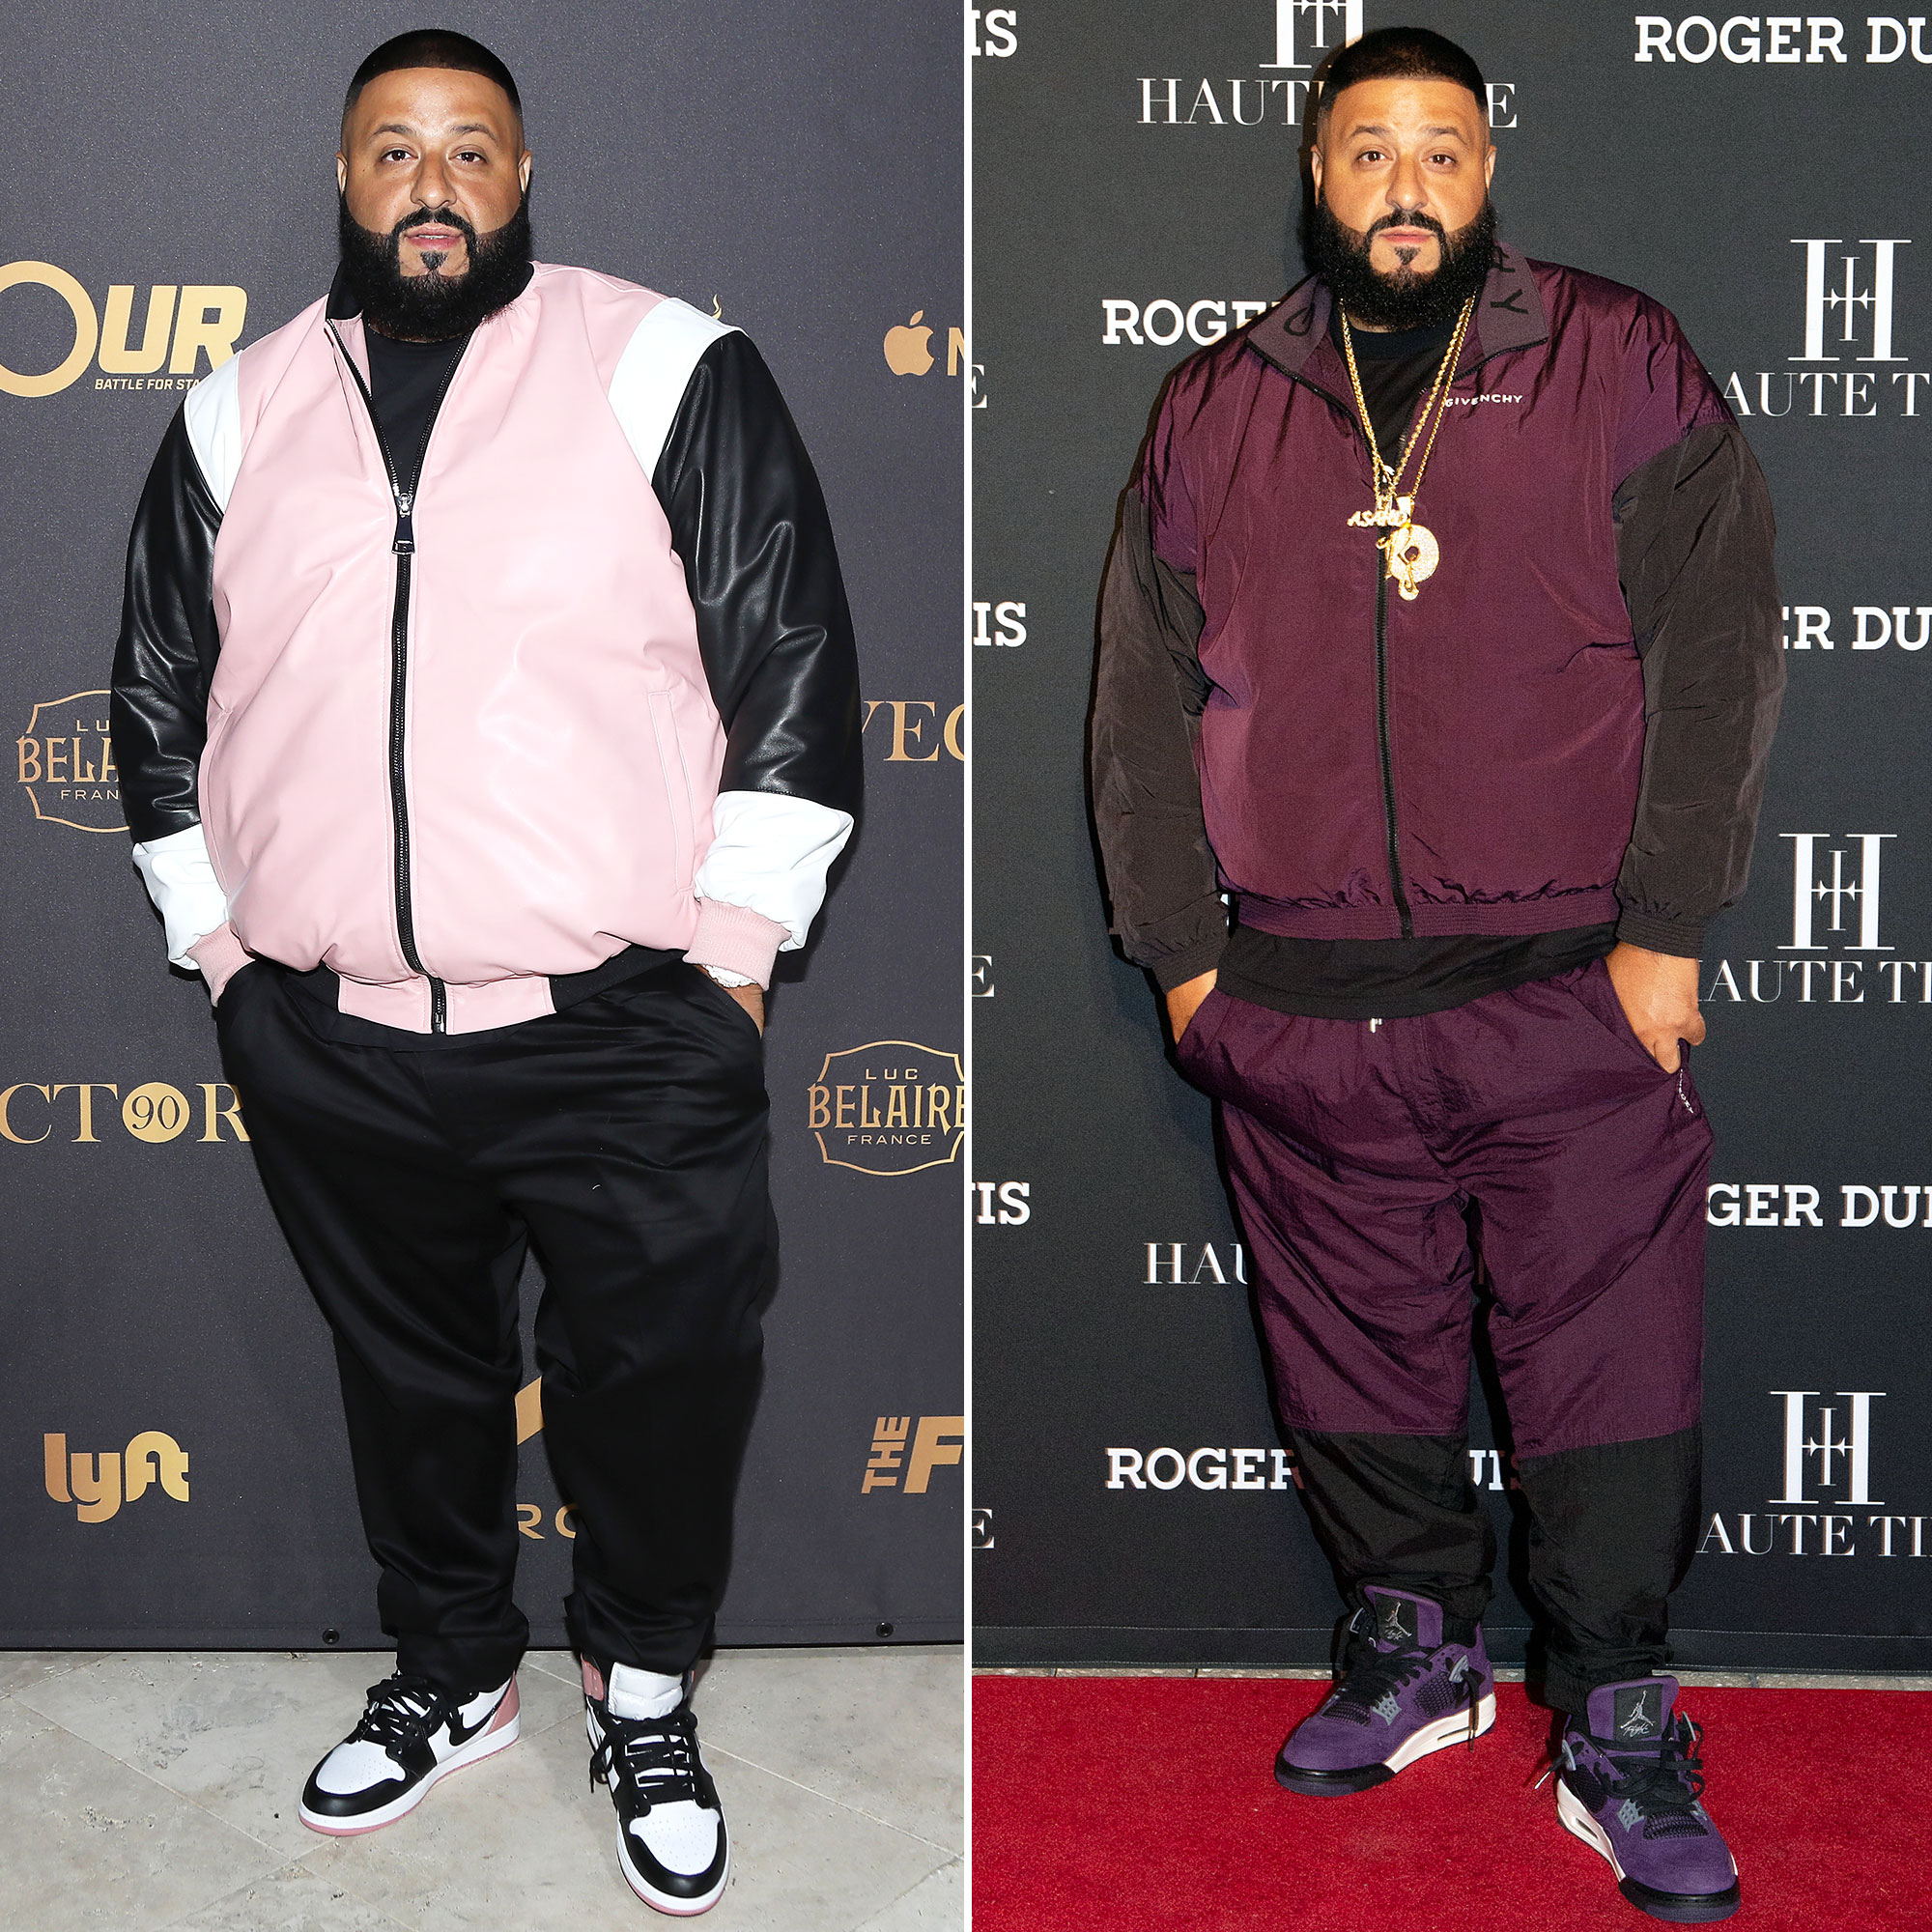 He Looks Happier': DJ Khaled Shows Off His Weight Loss